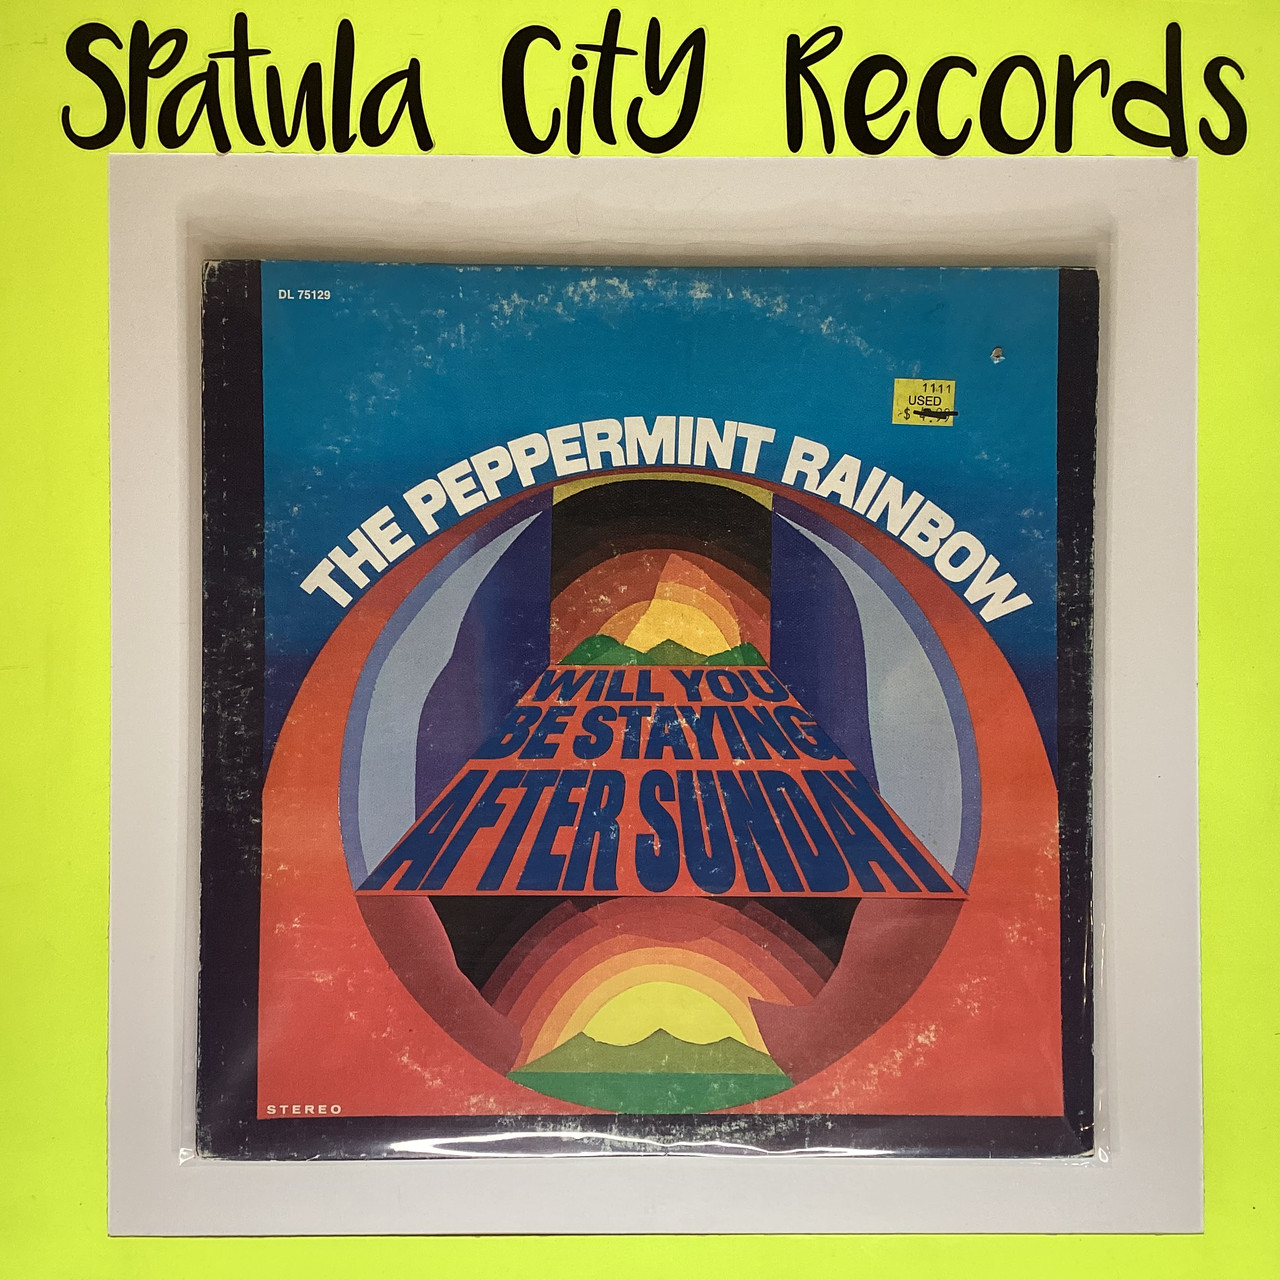 The Peppermint Rainbow - Will You Be Staying After Sunday - vinyl record LP